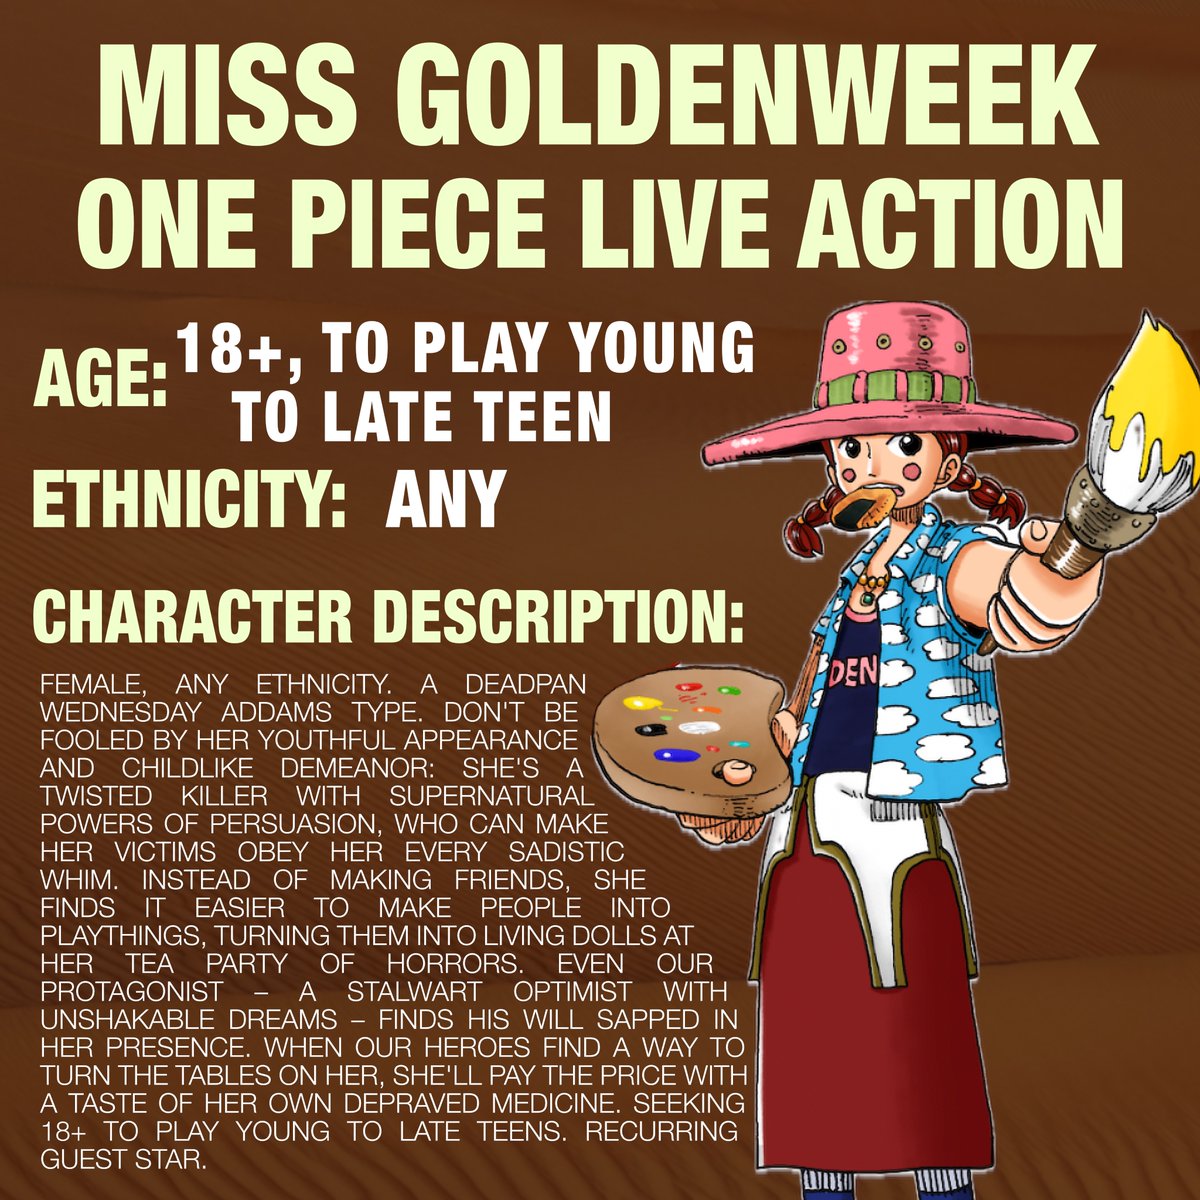 New Season 2 casting info for Miss Goldenweek in the live action One Piece. 

Character is Female, Any Ethnicity. 18+ to play Young to Late Teen. Recurring Guest Star.

Note: The casting call also mentions Season 2 being 8 episodes.